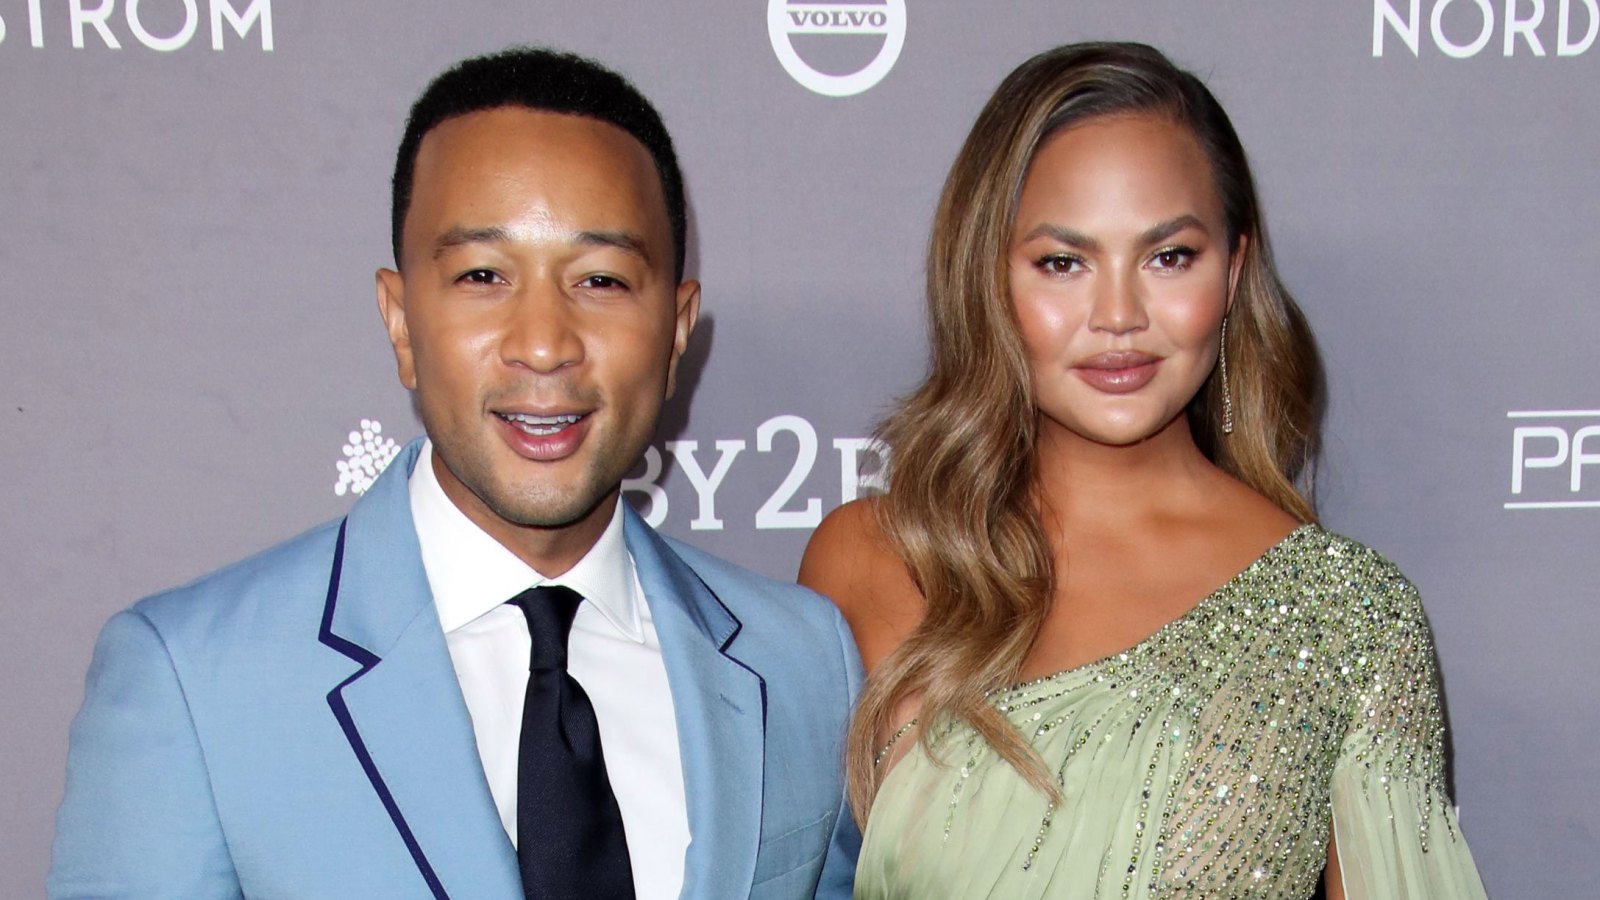 Chrissy Teigen Falls in Hilarious Ice Skating Video With John Legend